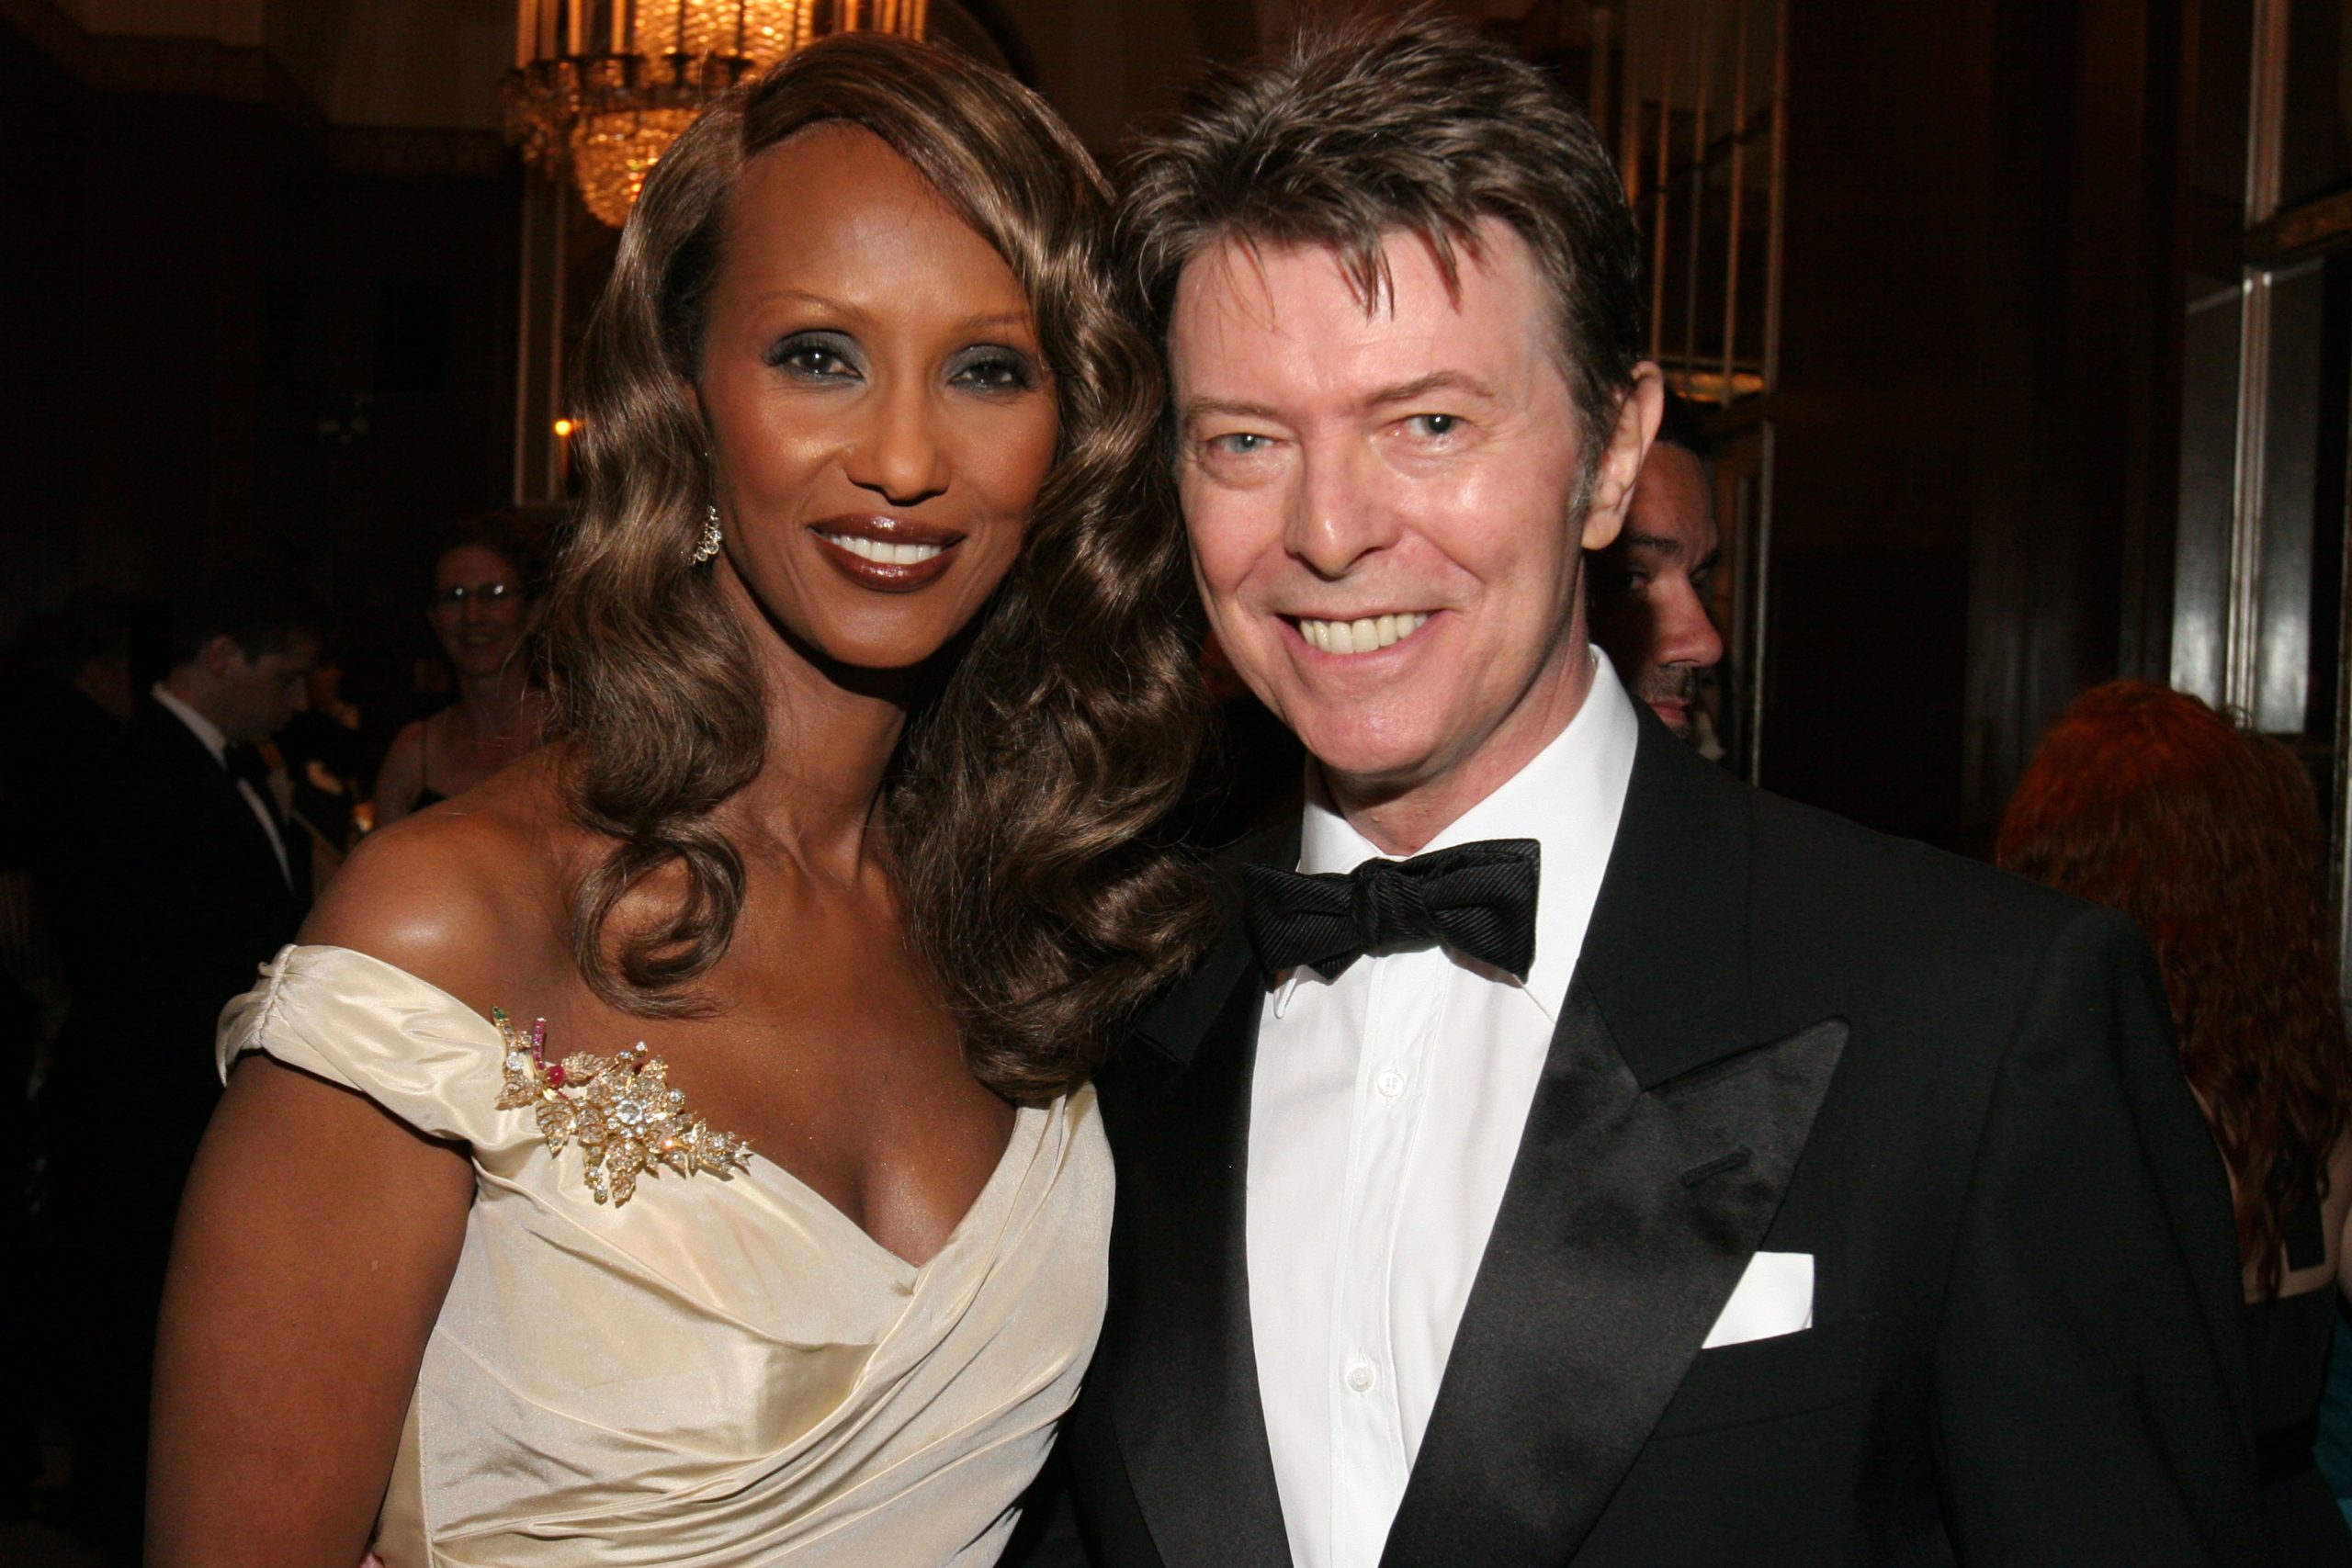 David Bowie’s Hit Song ‘Heroes’ Was Inspired By a Book Both He and His Wife Iman Loved